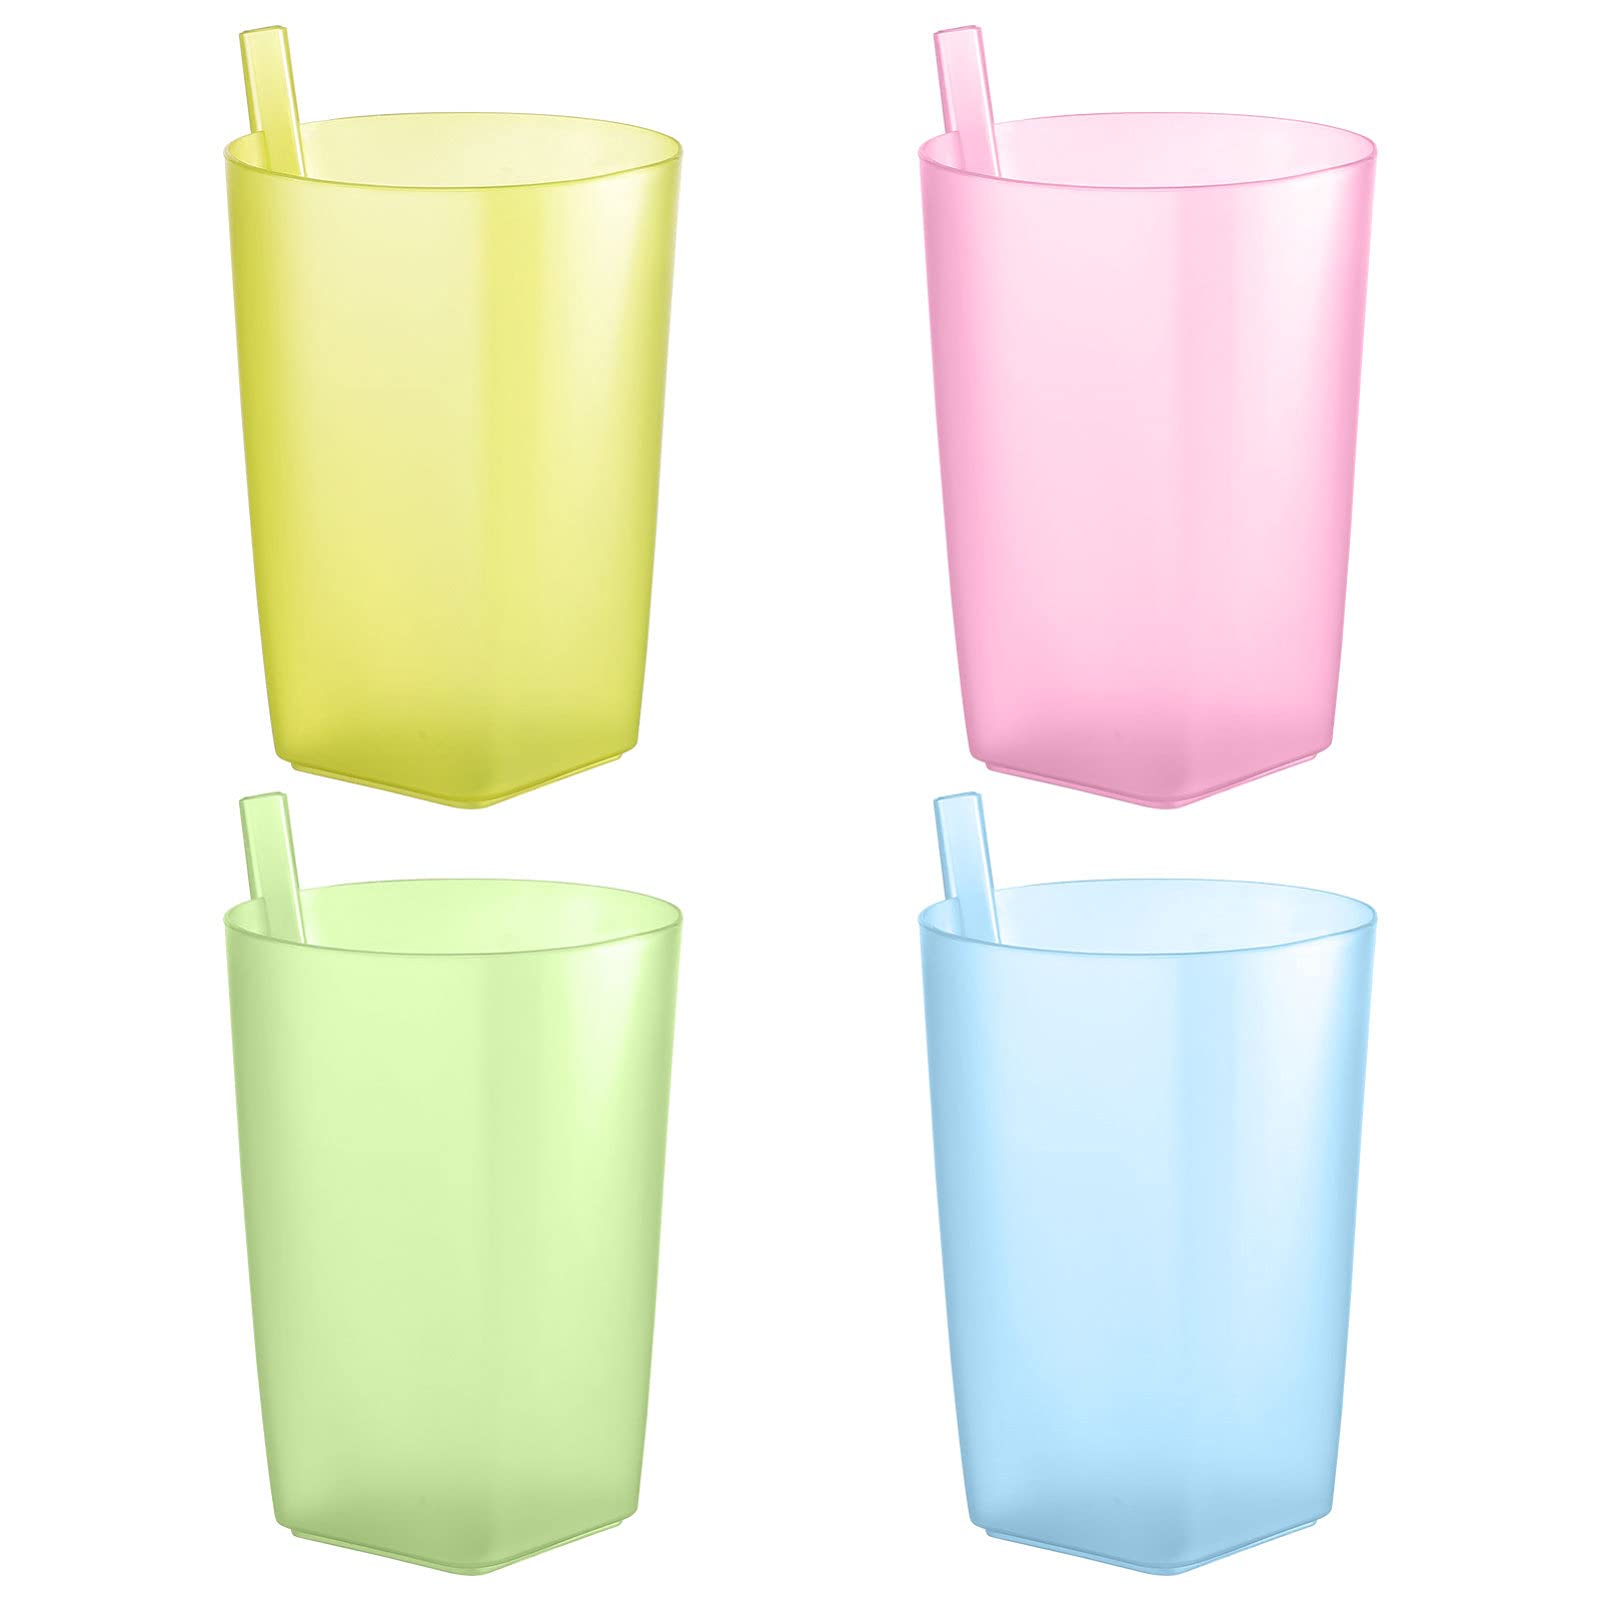 Healifty Sippy Cup with Straw Assorted Colours Straw Cups Plastic Cup Drinking Cups for Toddlers Kids Children